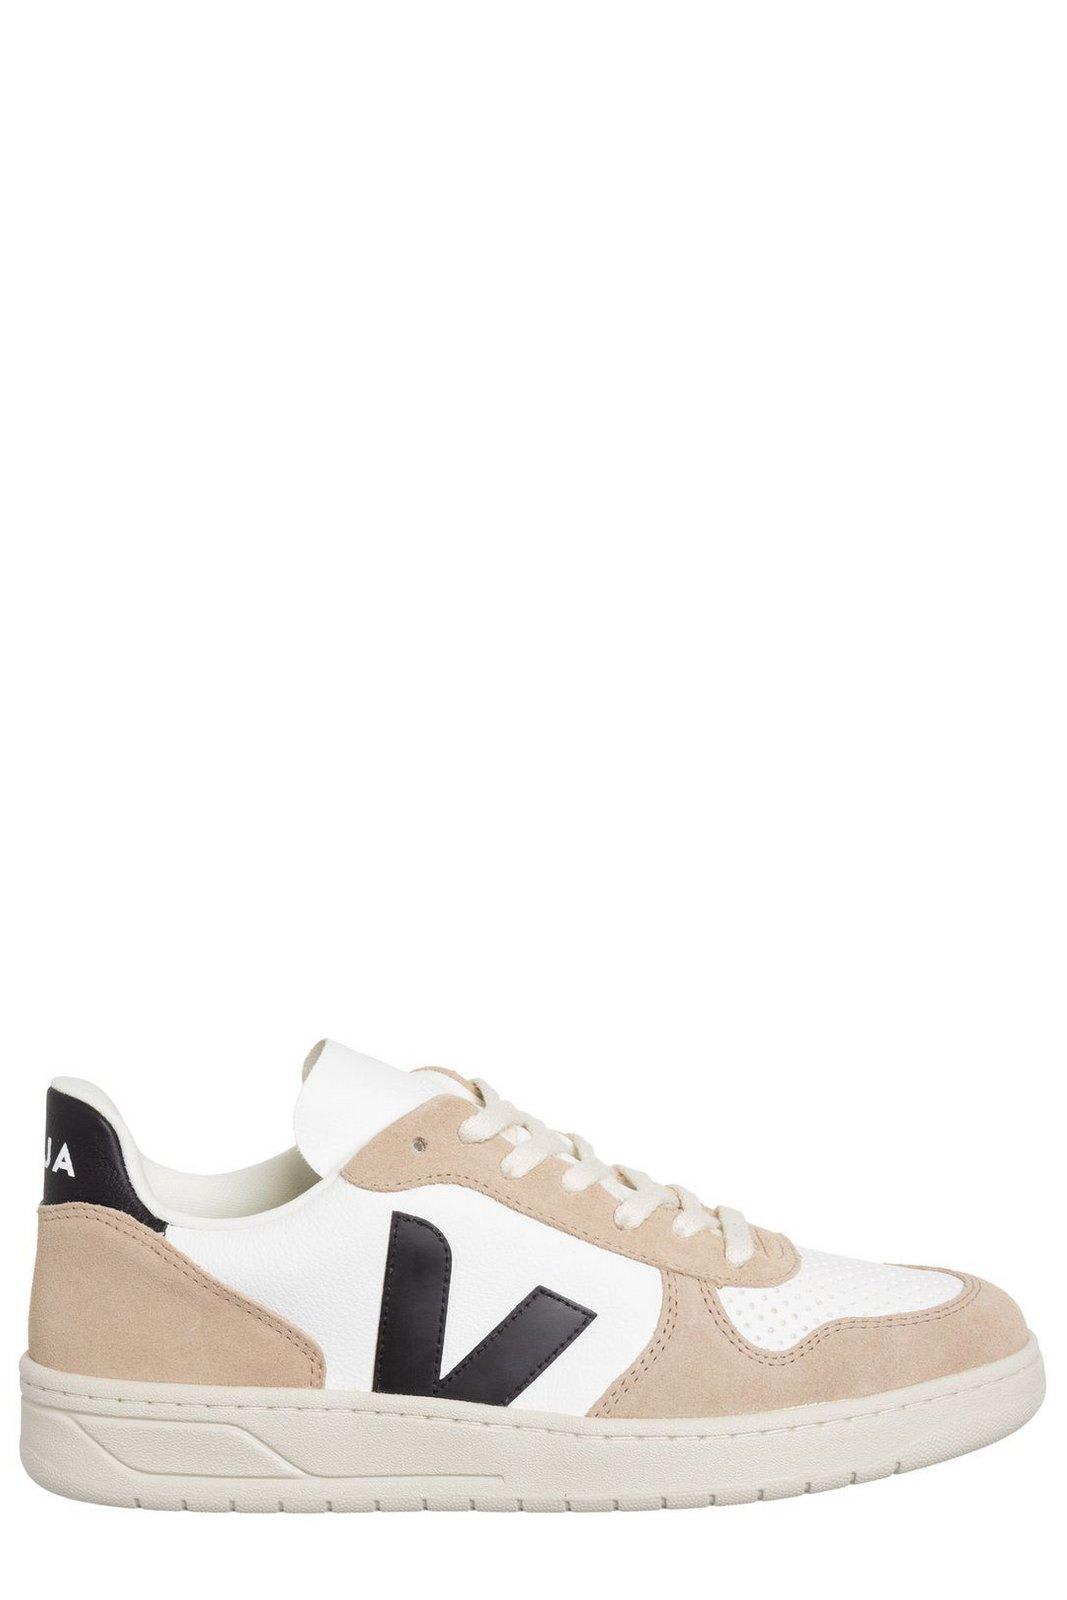 Shop Veja V-10 Panelled Low-top Sneakers In Extra White Black Sahara